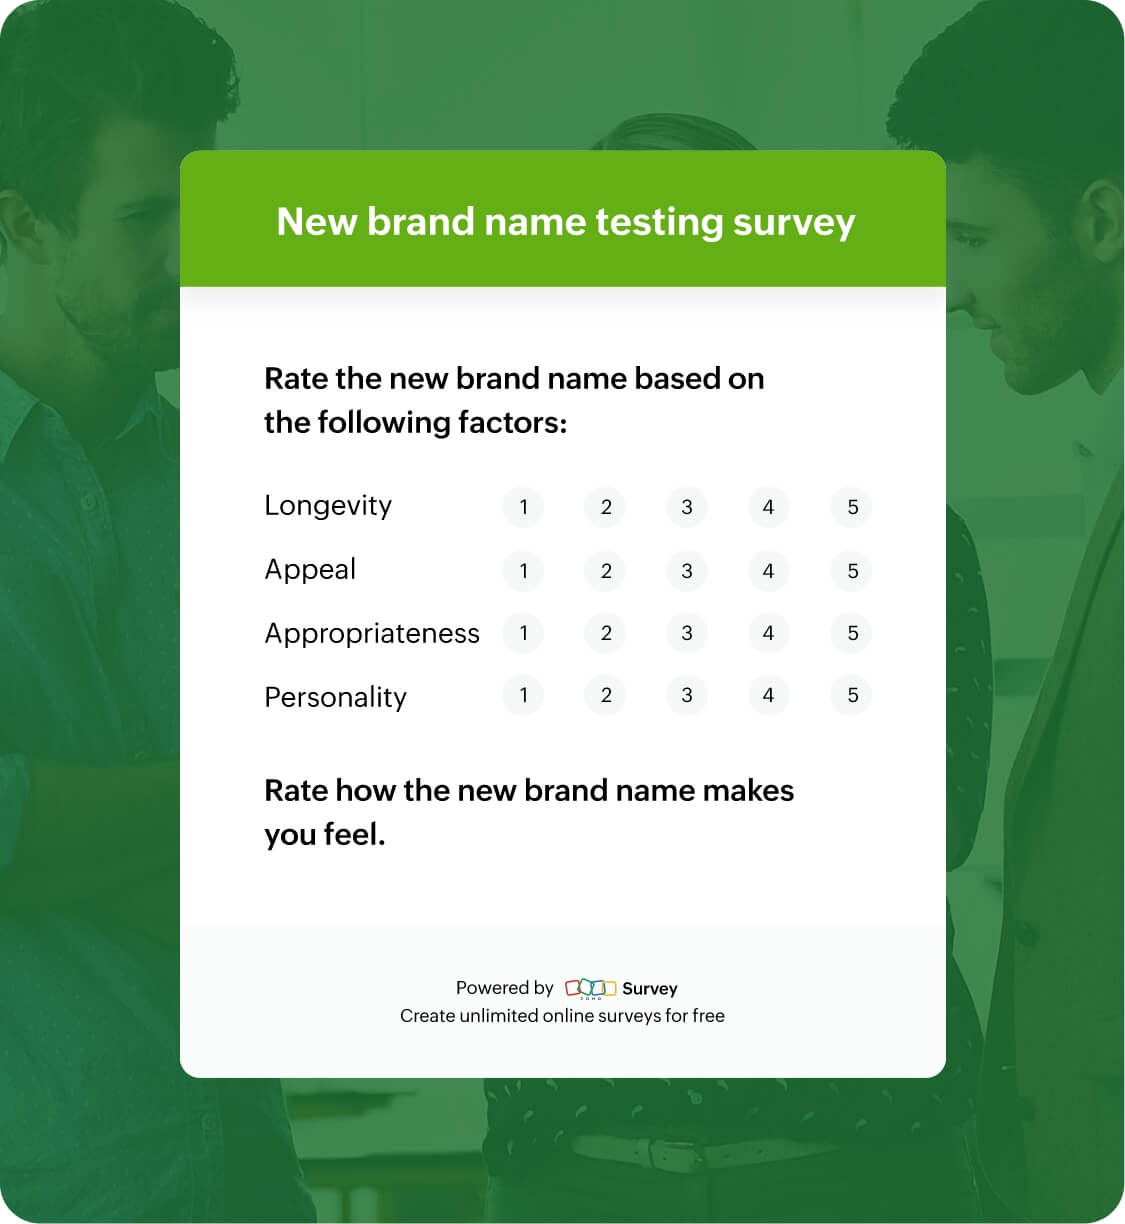 New brand name testing survey questionnaire template